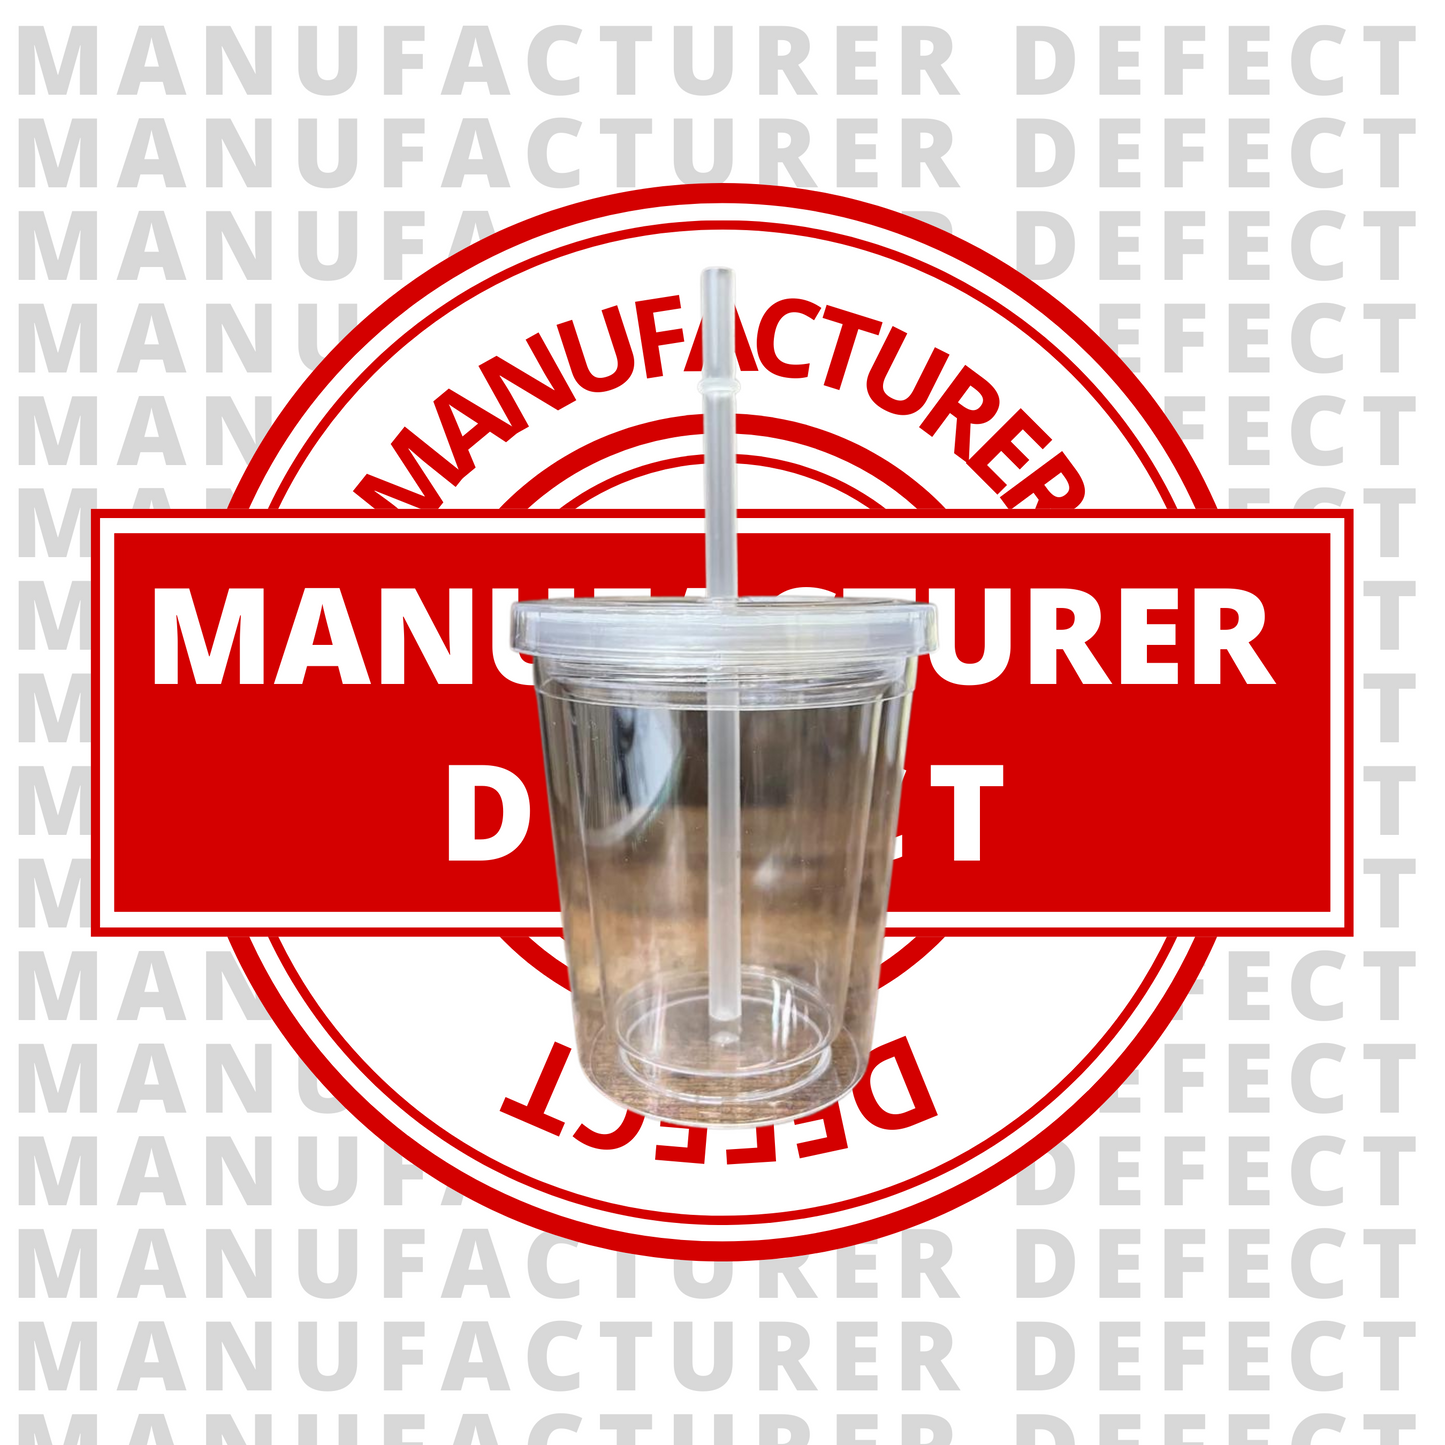 8oz Clear Tumblers - Manufacturers Defect